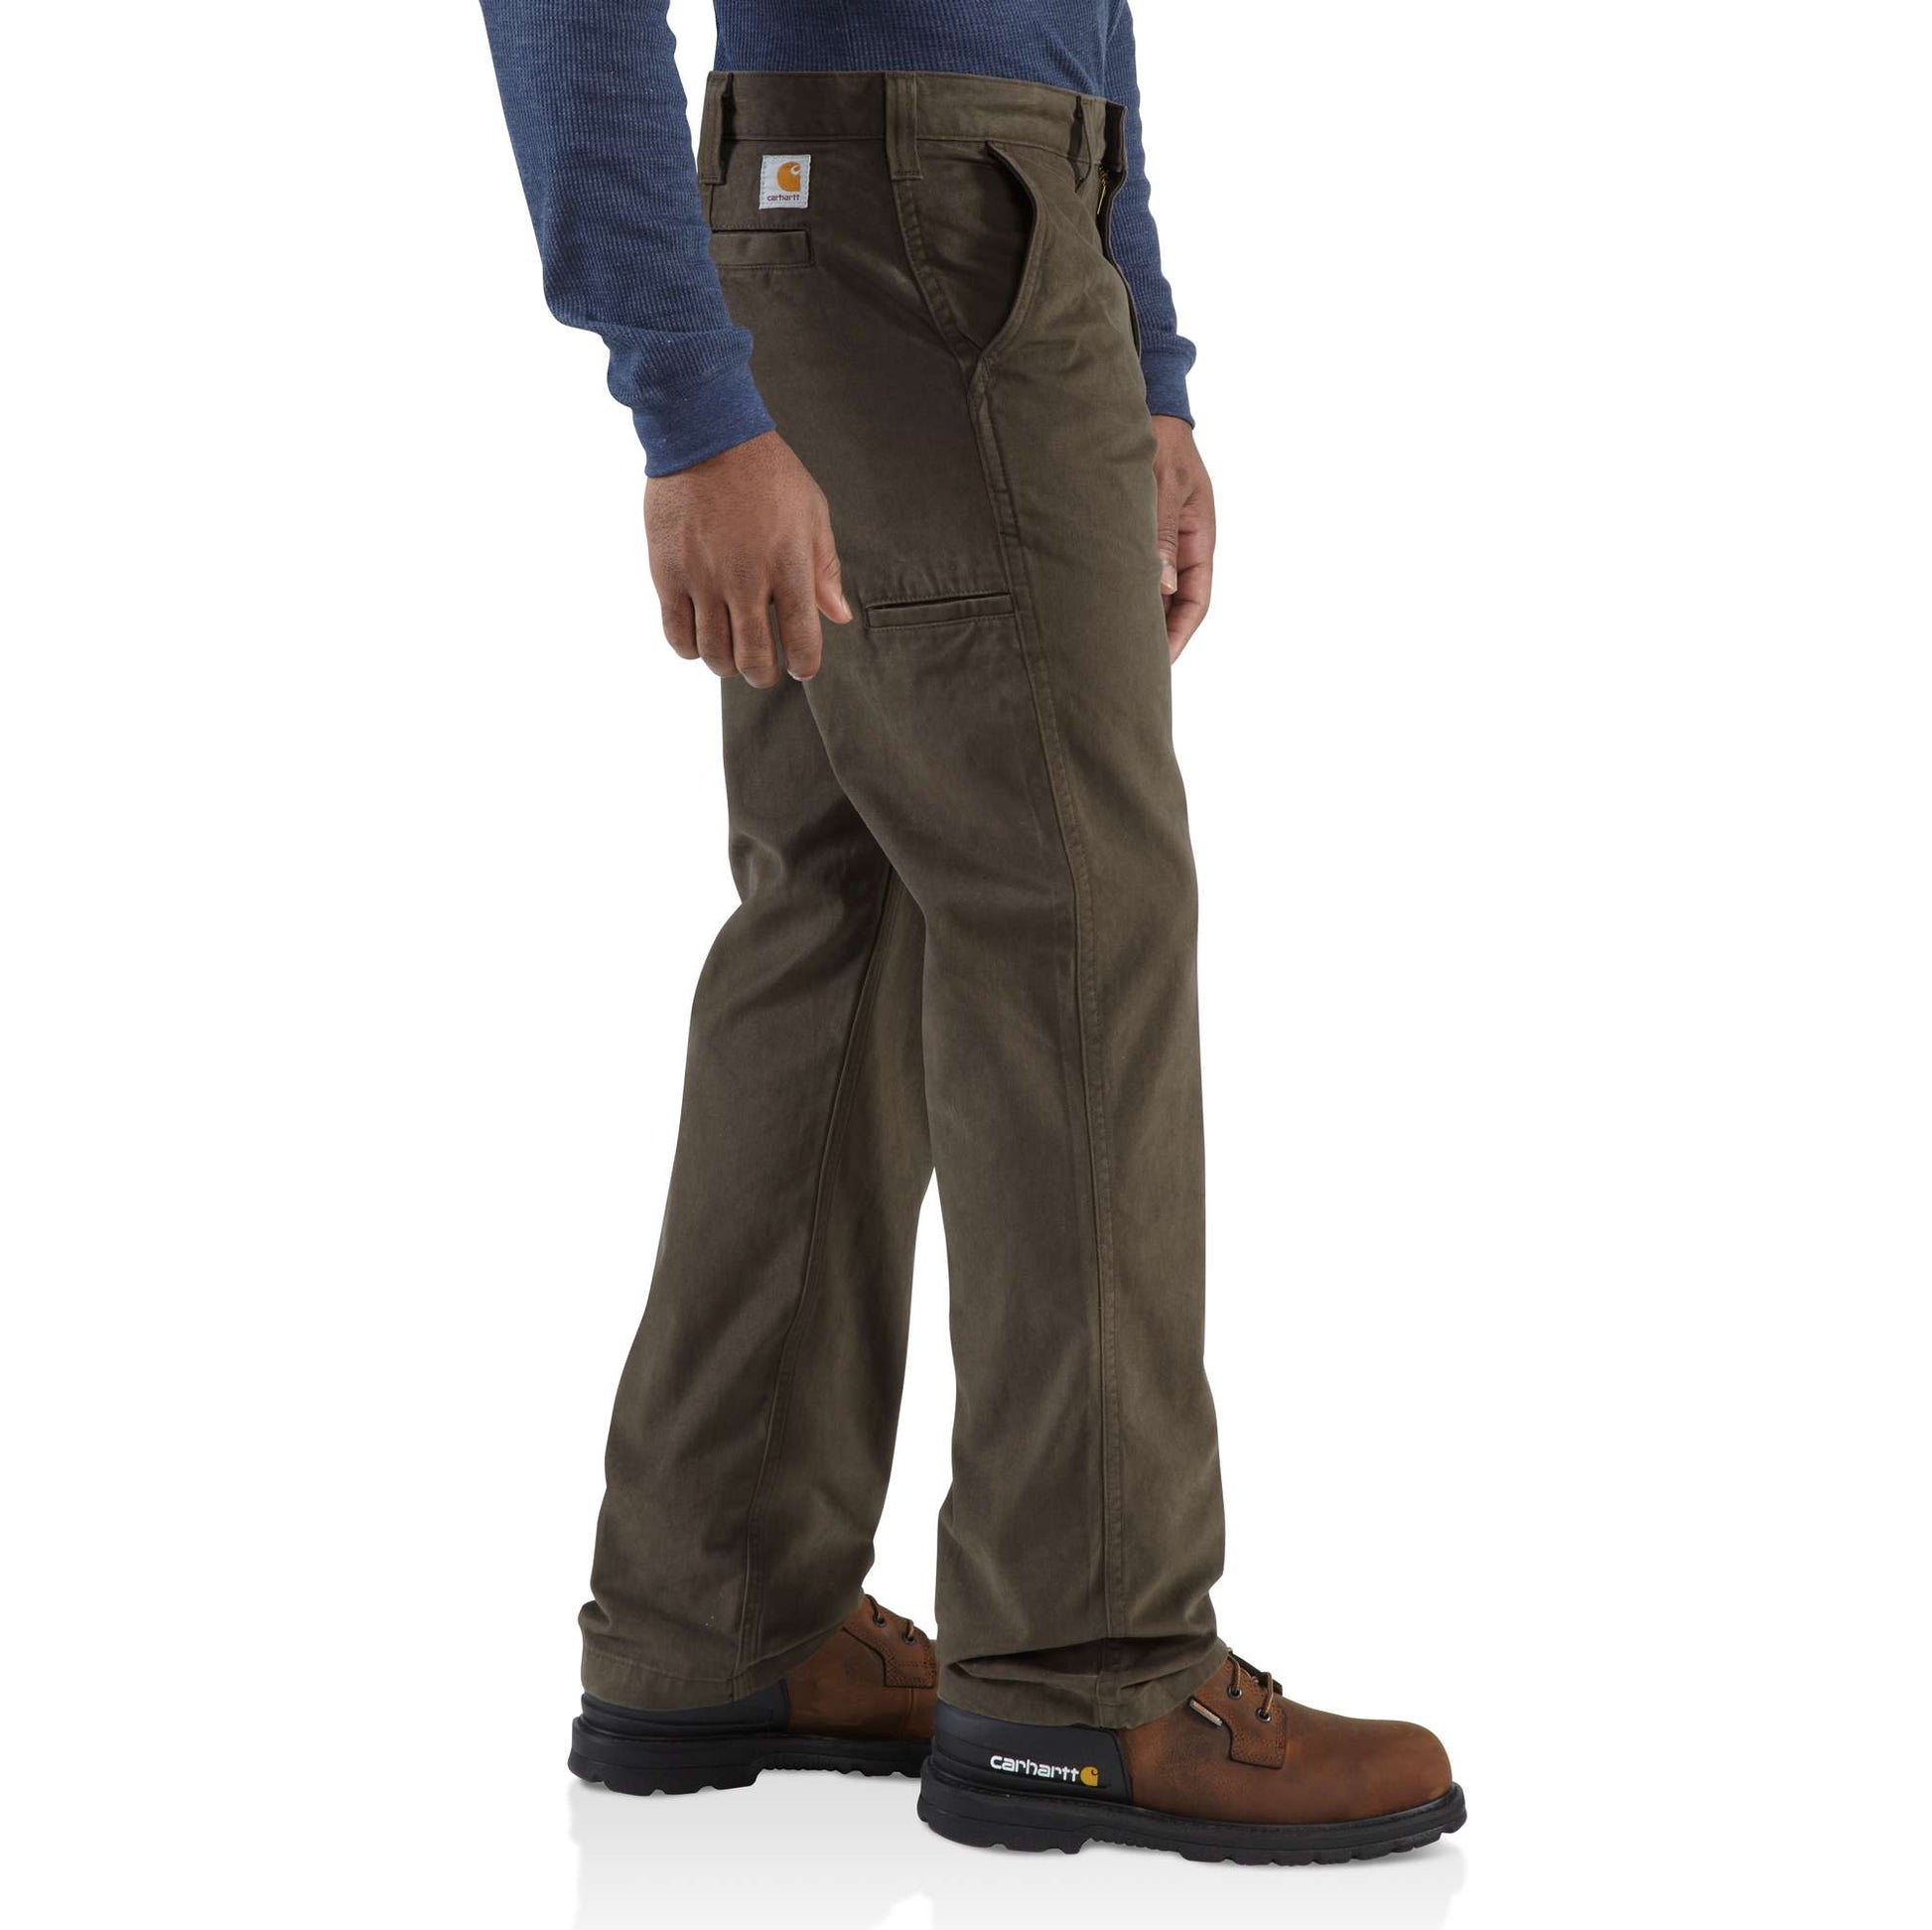 Carhartt Men's Washed Twill Dungaree - Relaxed Fit